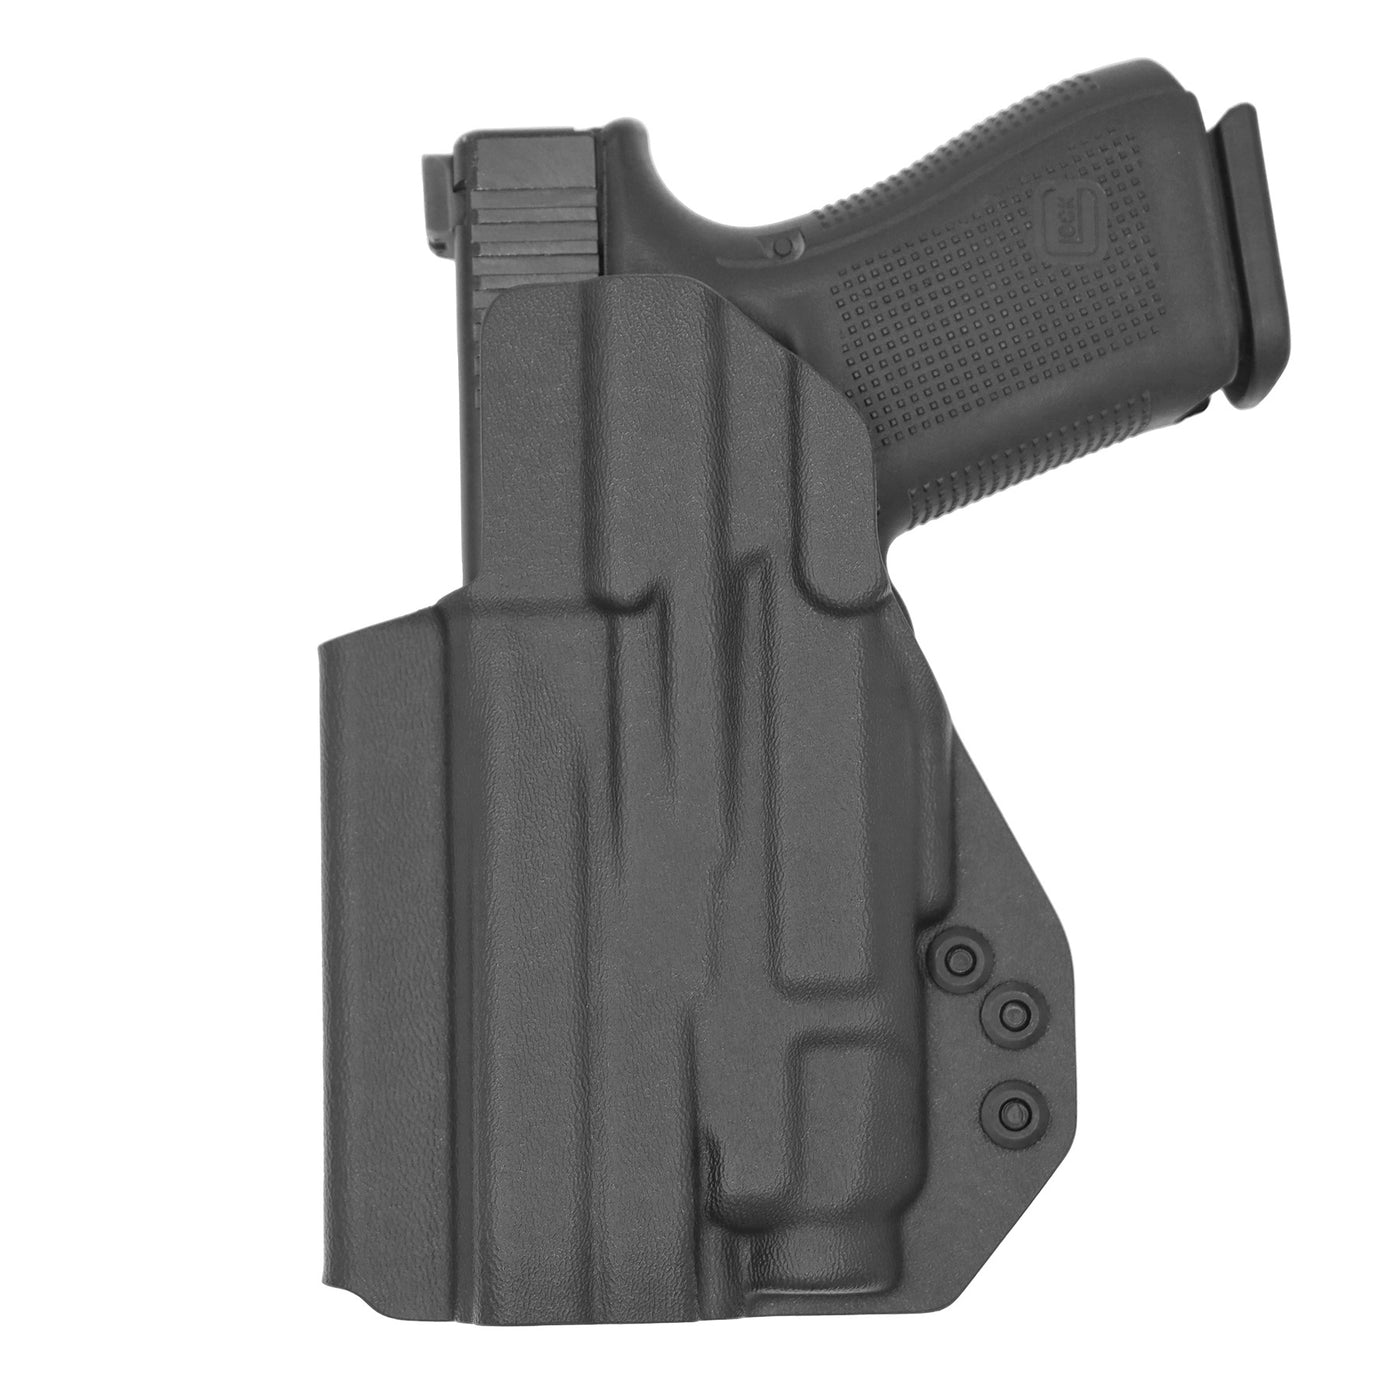 C&G Holsters Quickship IWB Tactical Glock 19/23 Streamlight TLR7 in holstered position back view